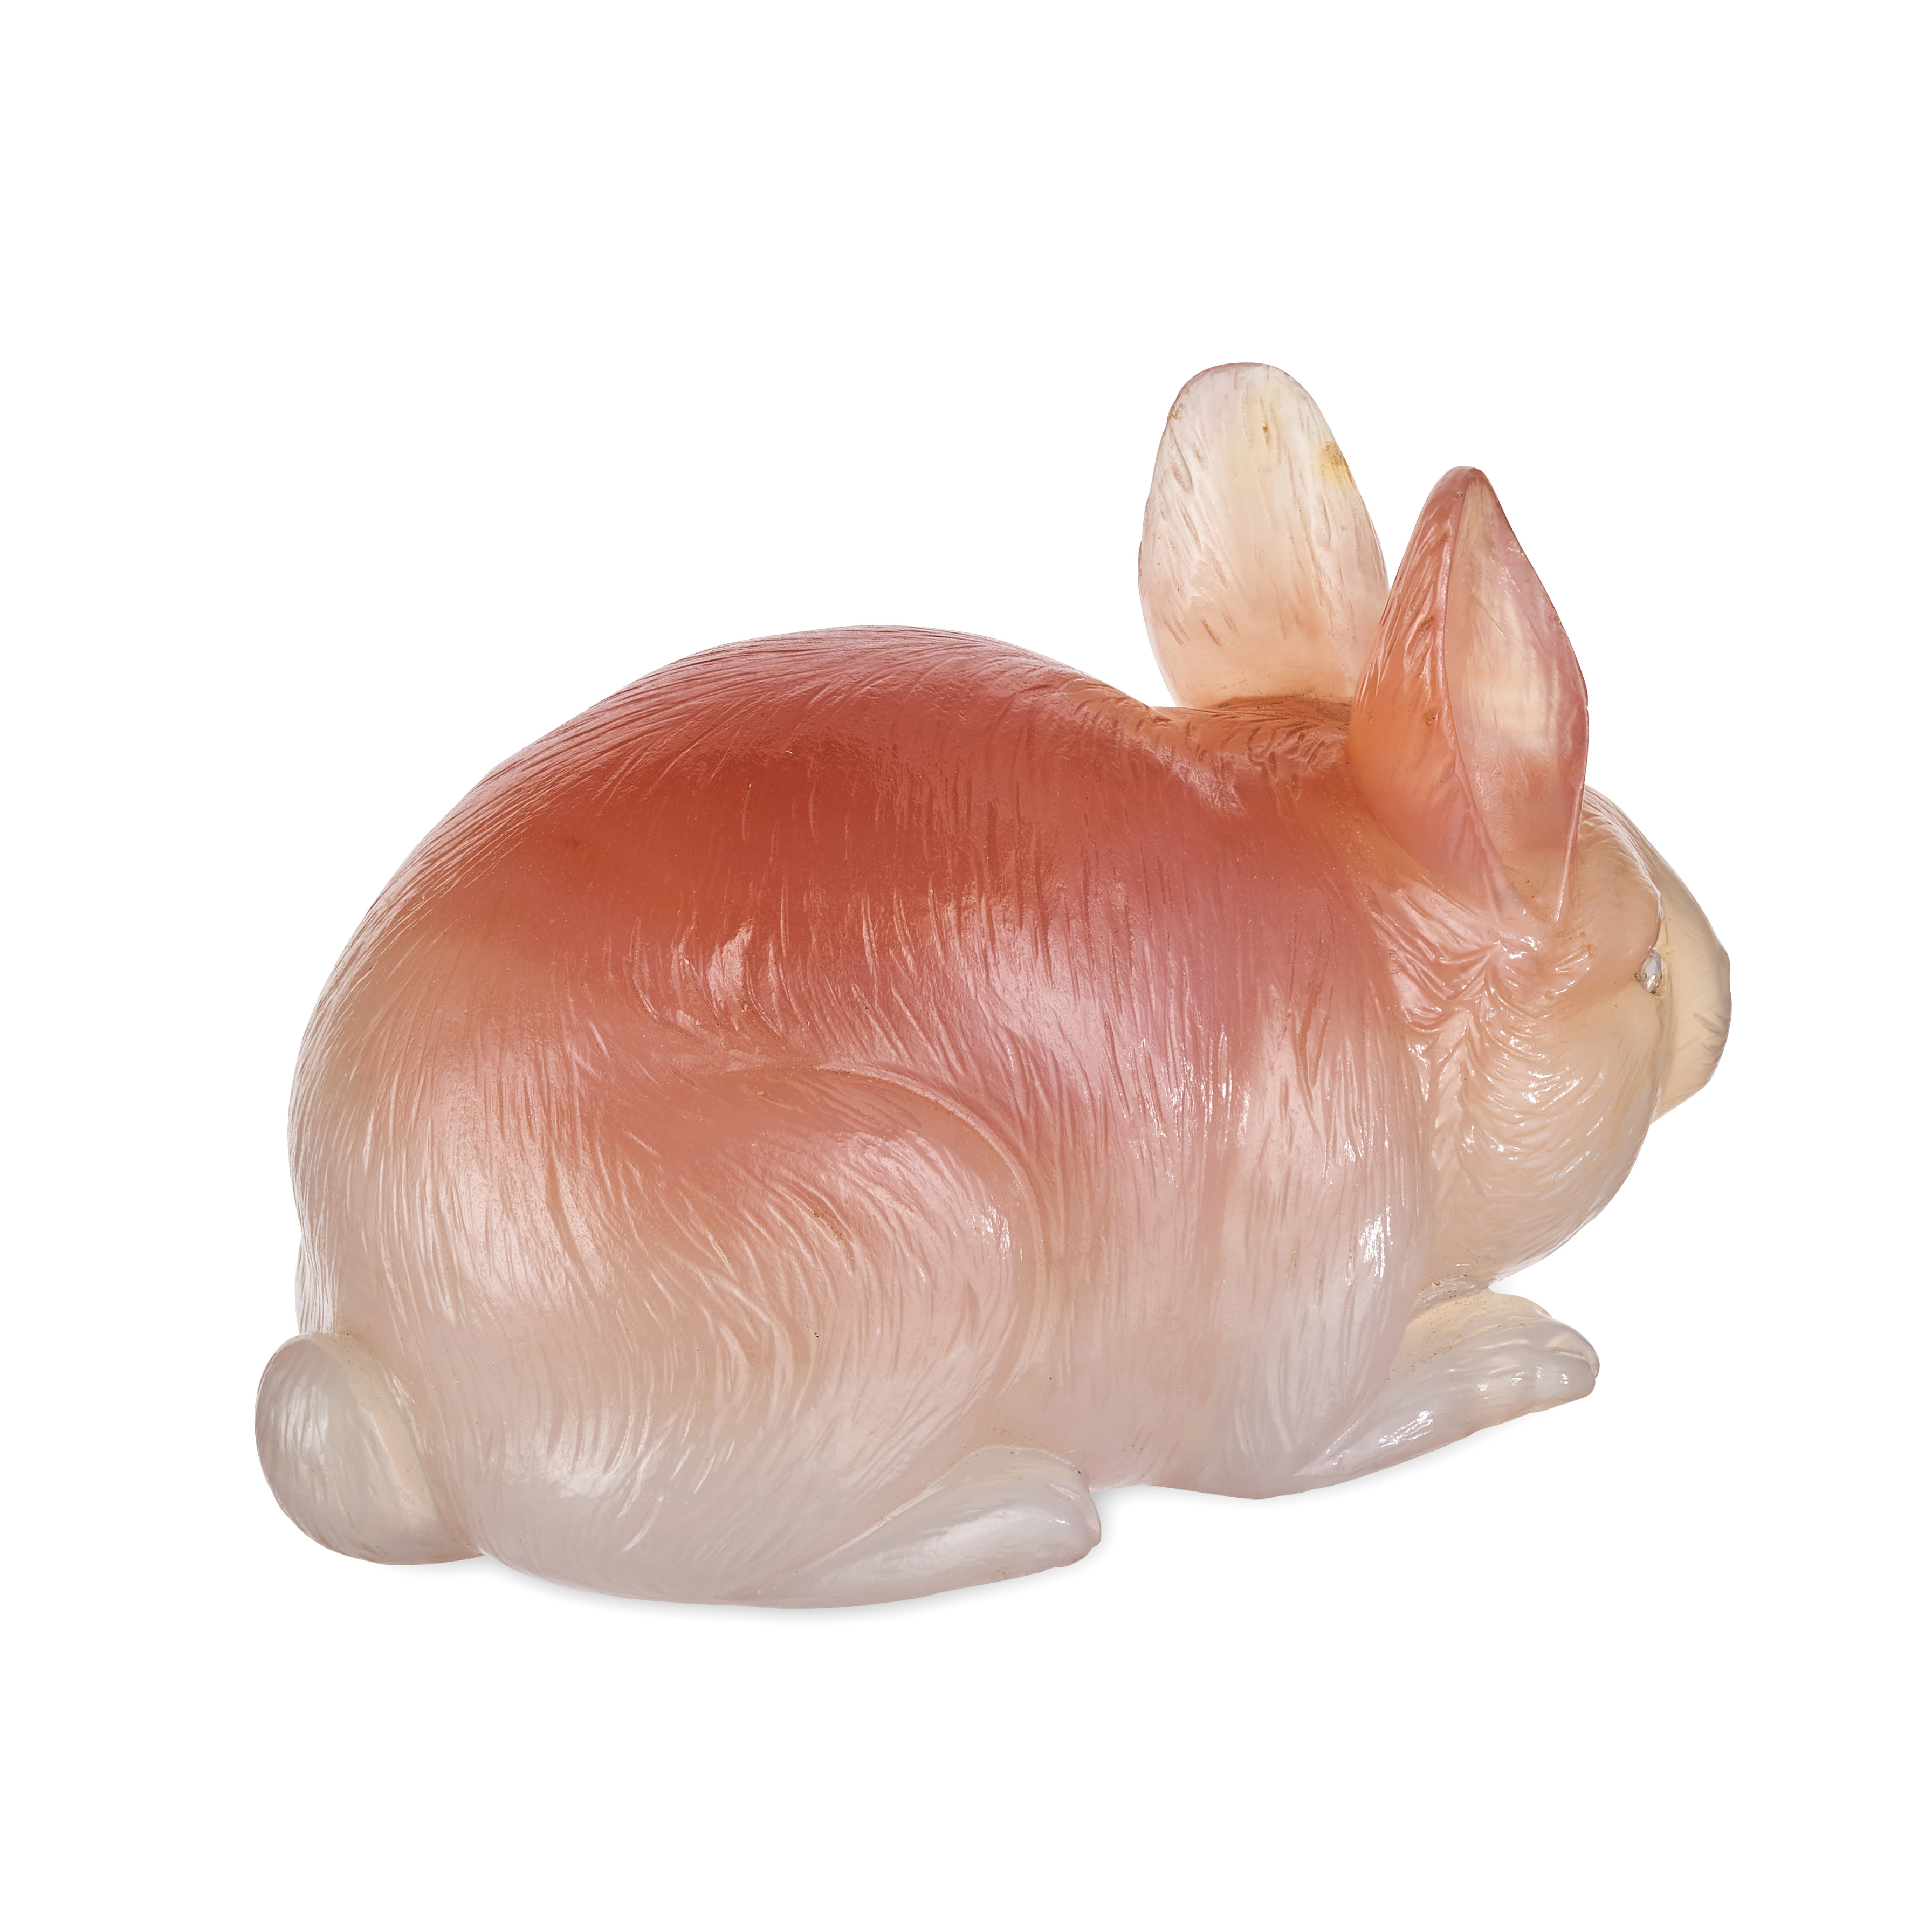 FABERGE, A JEWELLED AGATE MODEL OF A RABBIT, ST PETERSBURG, CIRCA 1900 - Image 5 of 10